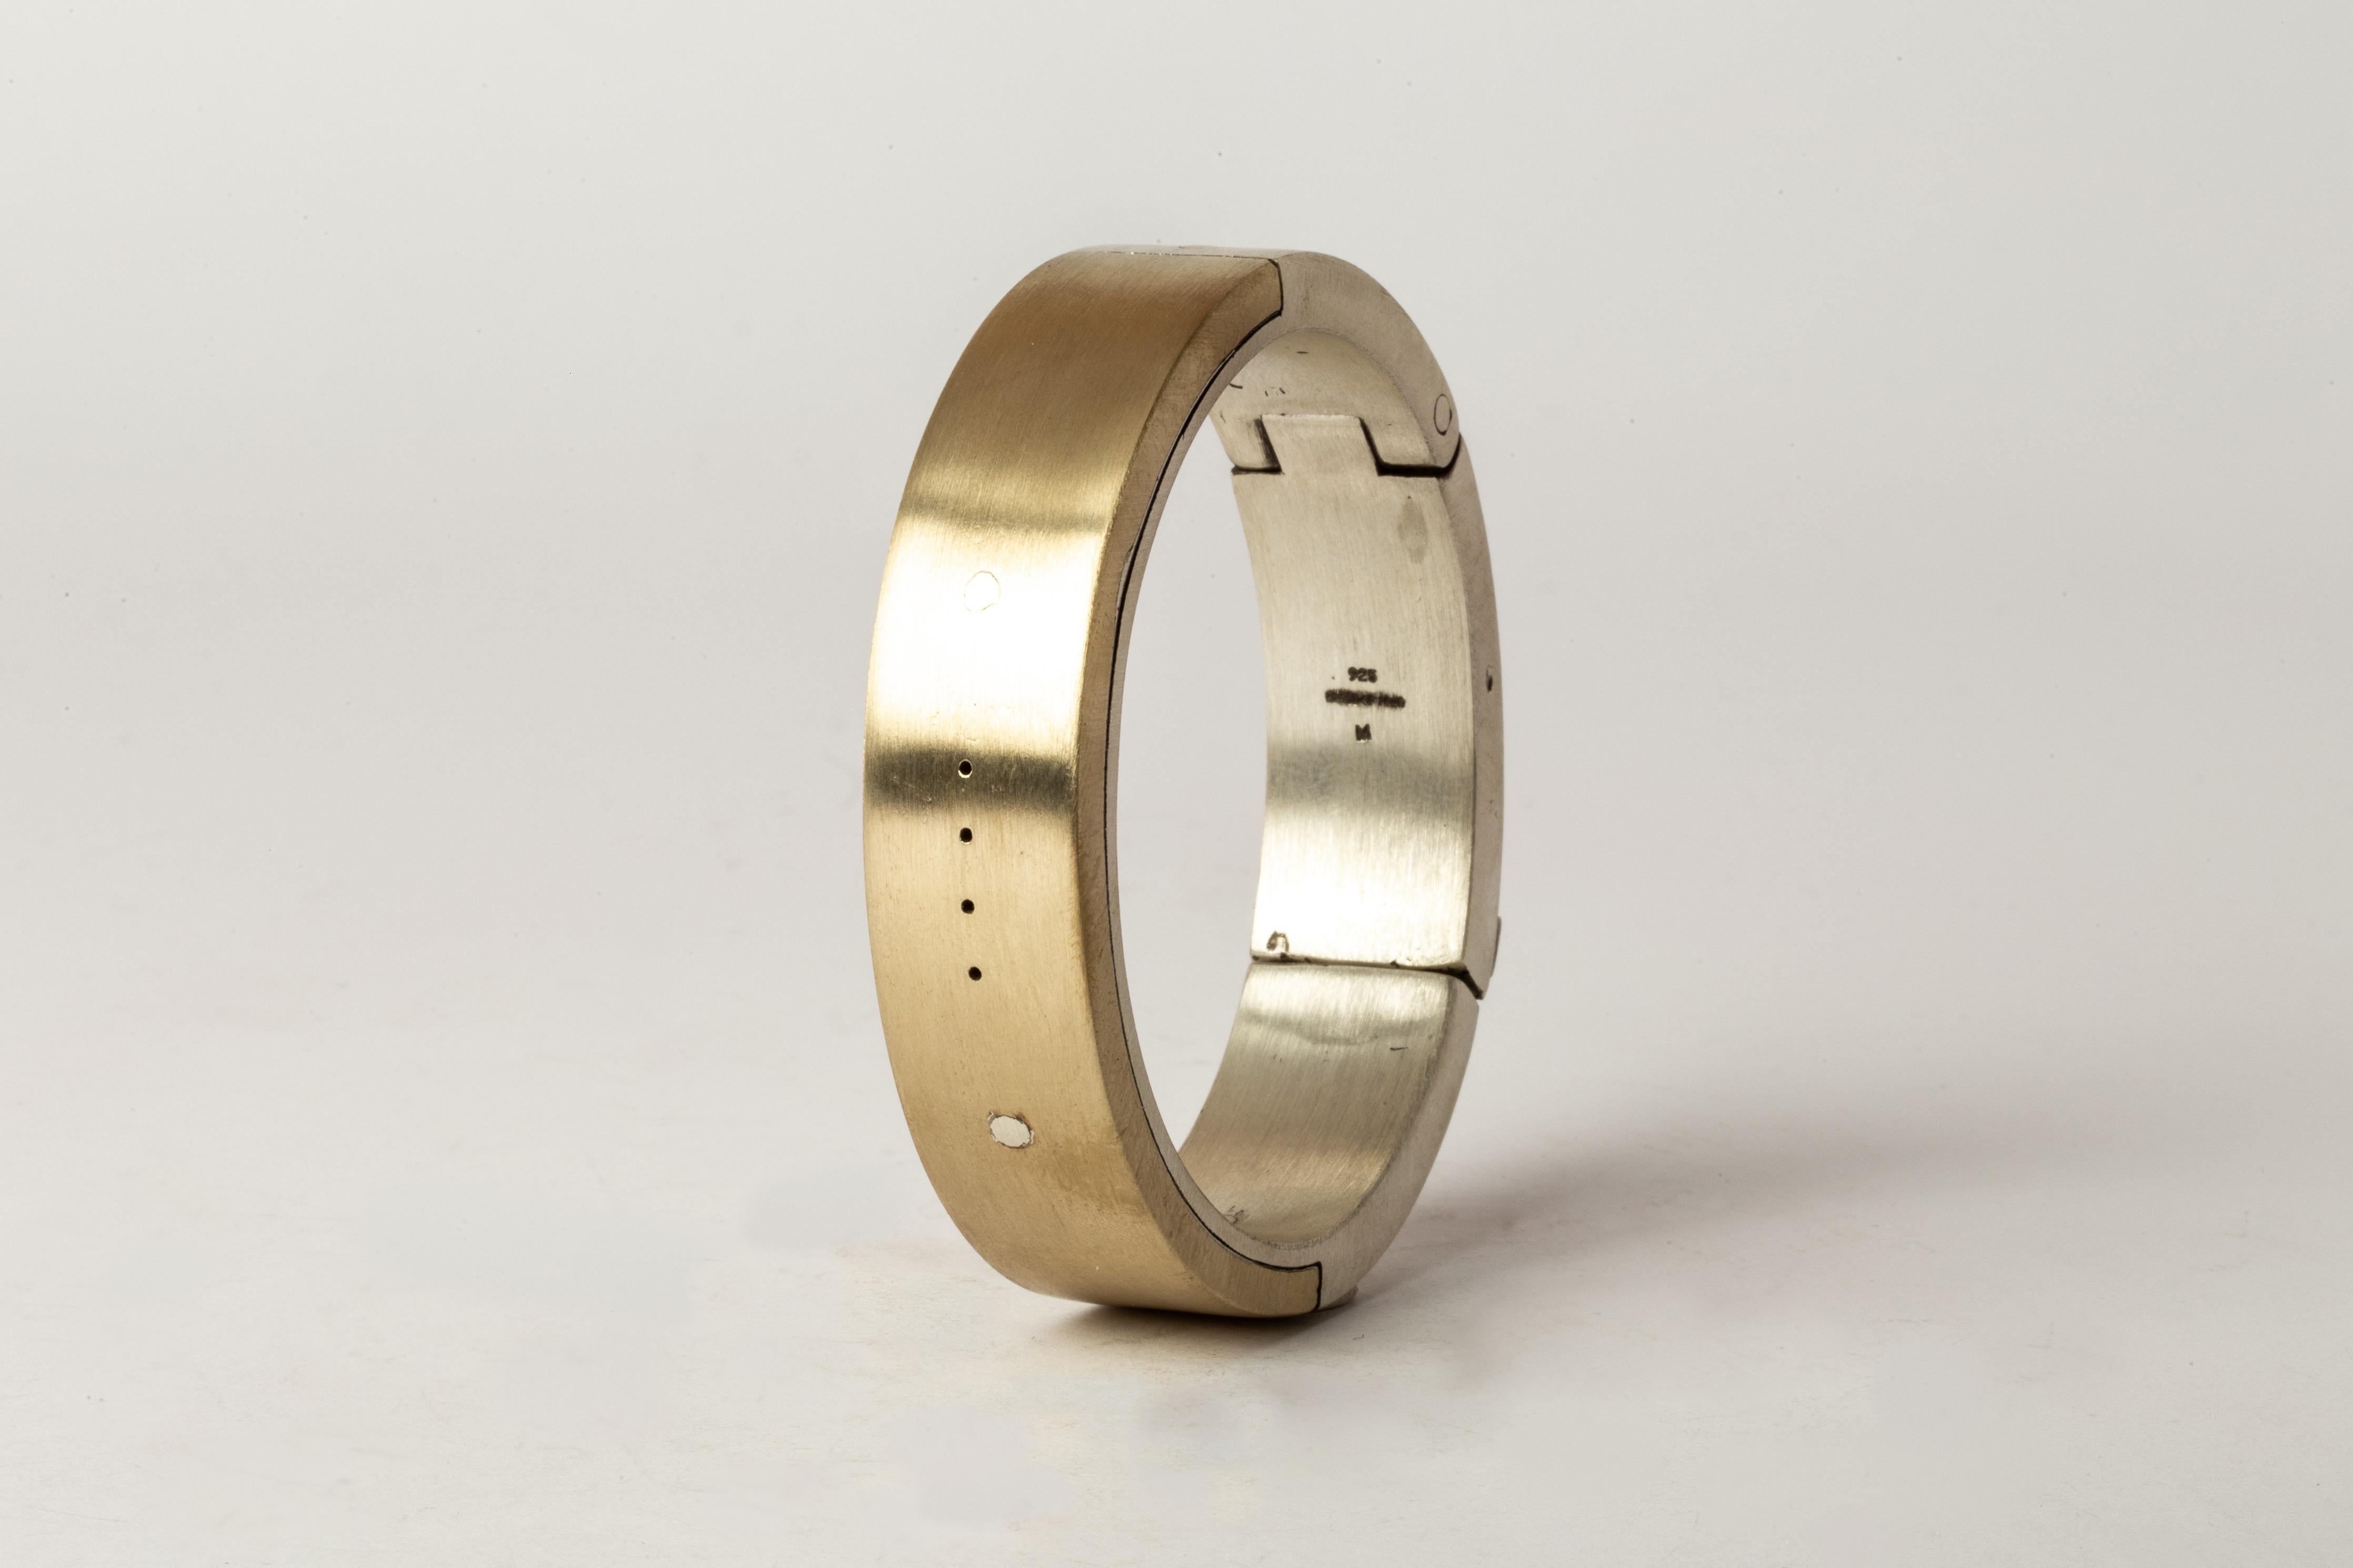 Bracelet in matte sterling silver and matte brass. The Sistema series is first family within Parts of Four. As a mode of creation it expresses the core principle of P/4 which is modularity. The 